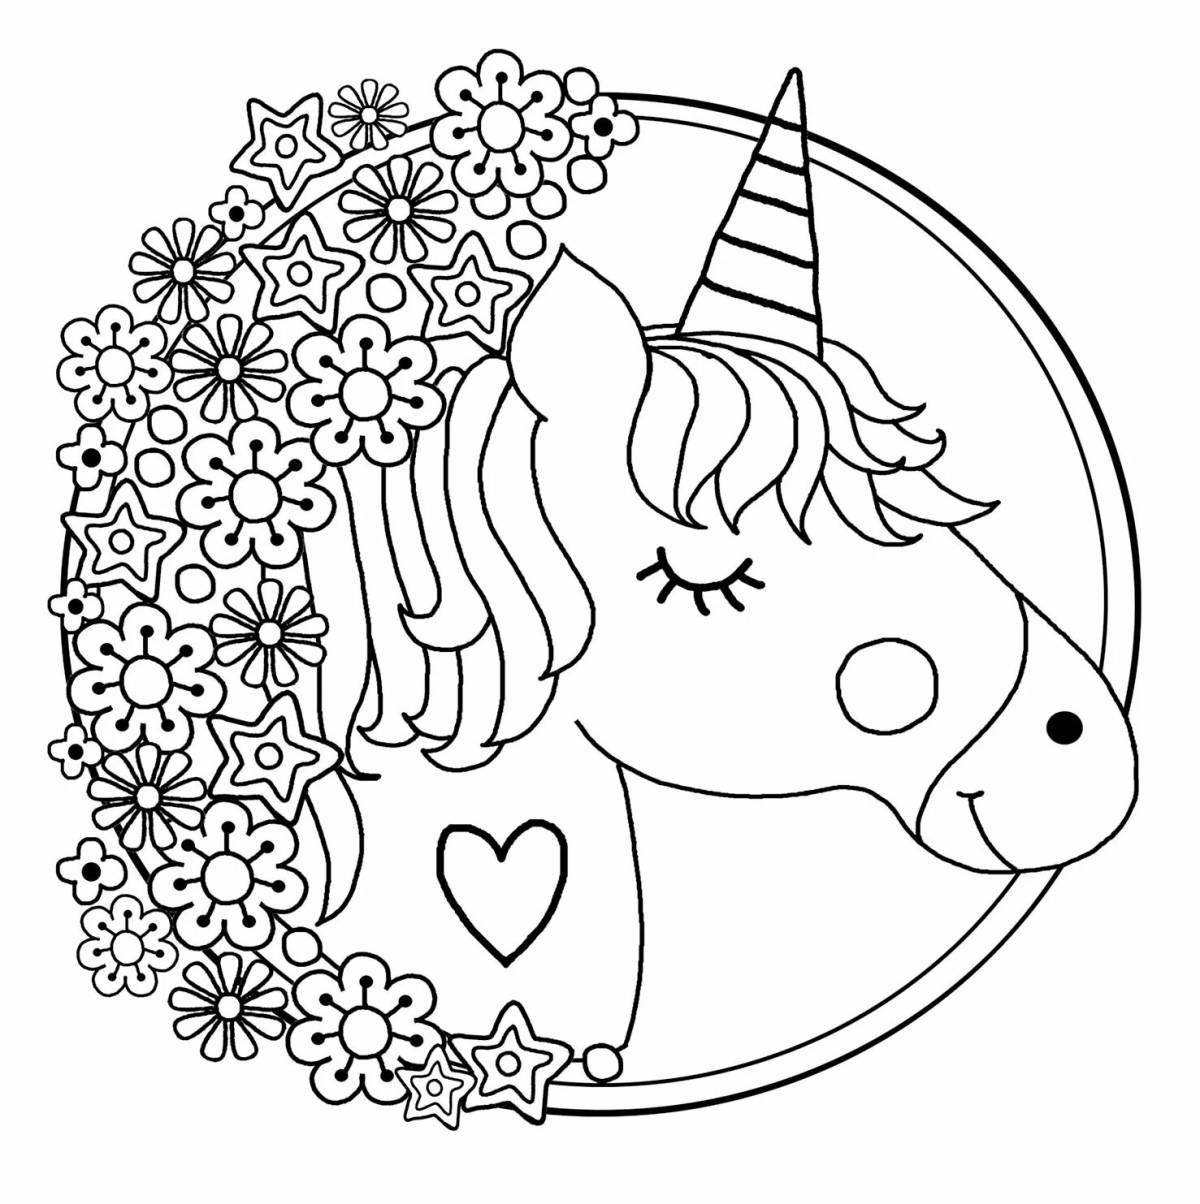 Amazing coloring pages for girls cute unicorns